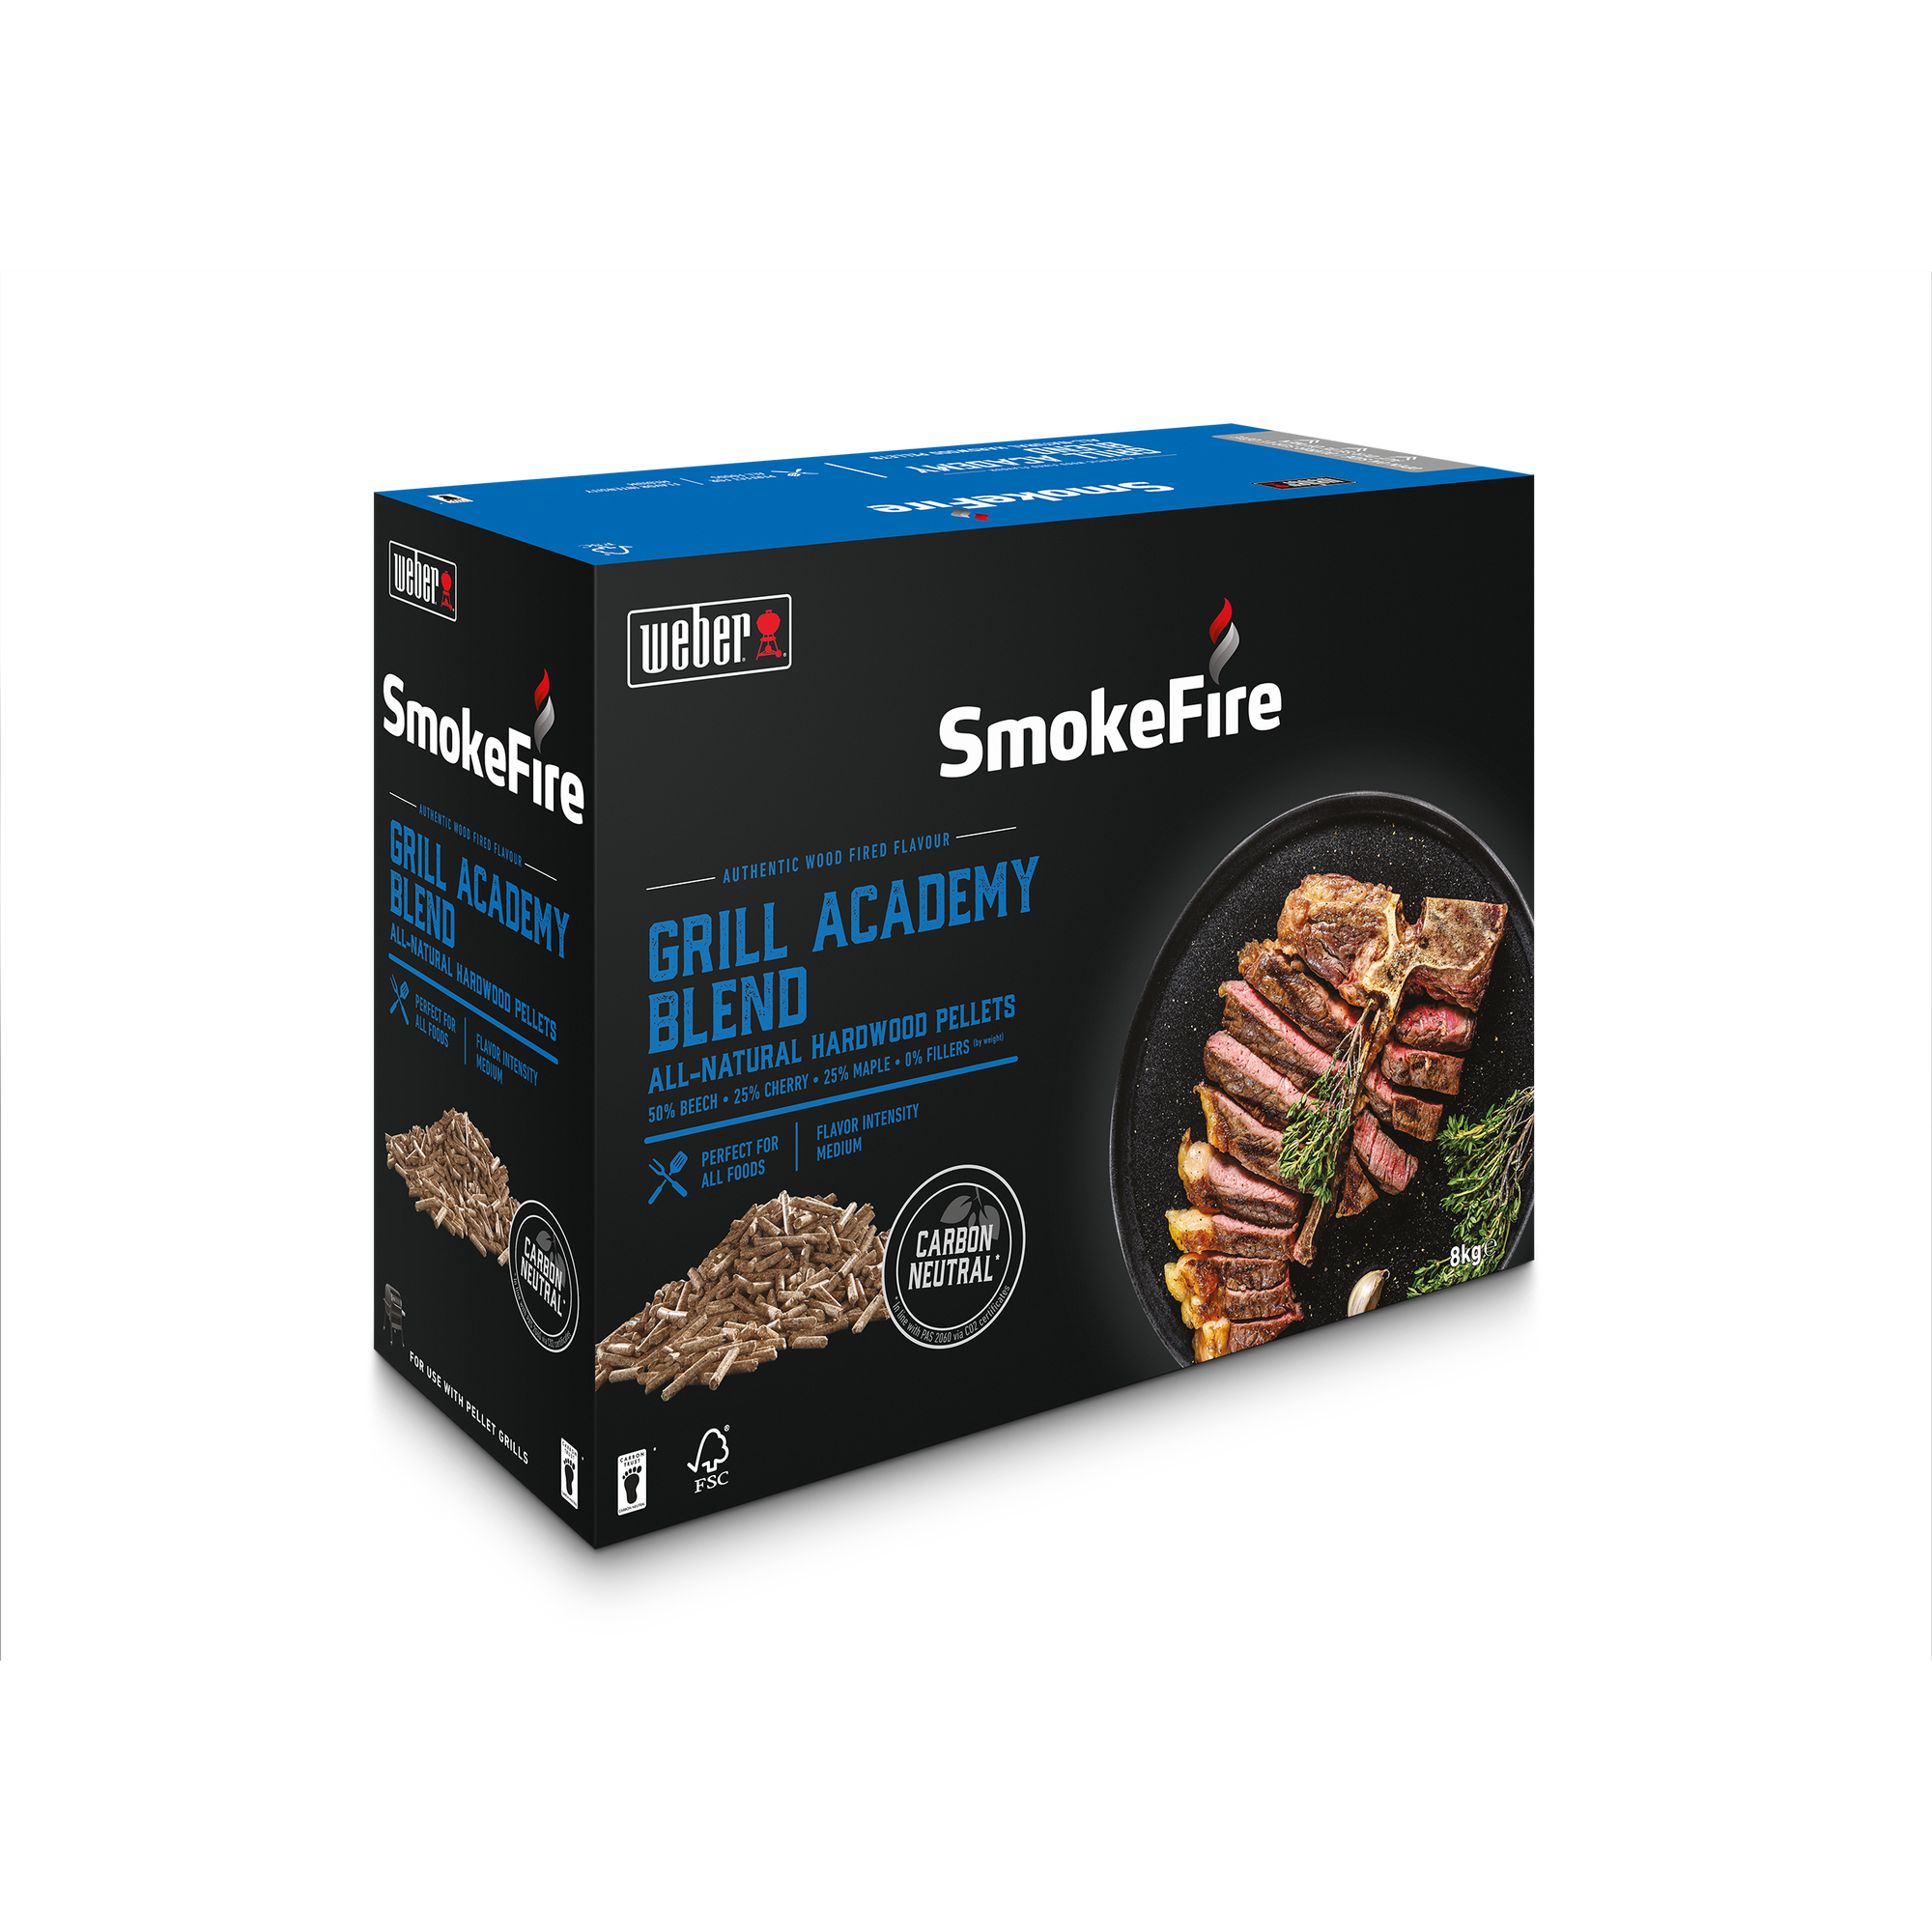 Holzpellets 'SmokeFire' Grill Academy Blend 8 kg + product picture